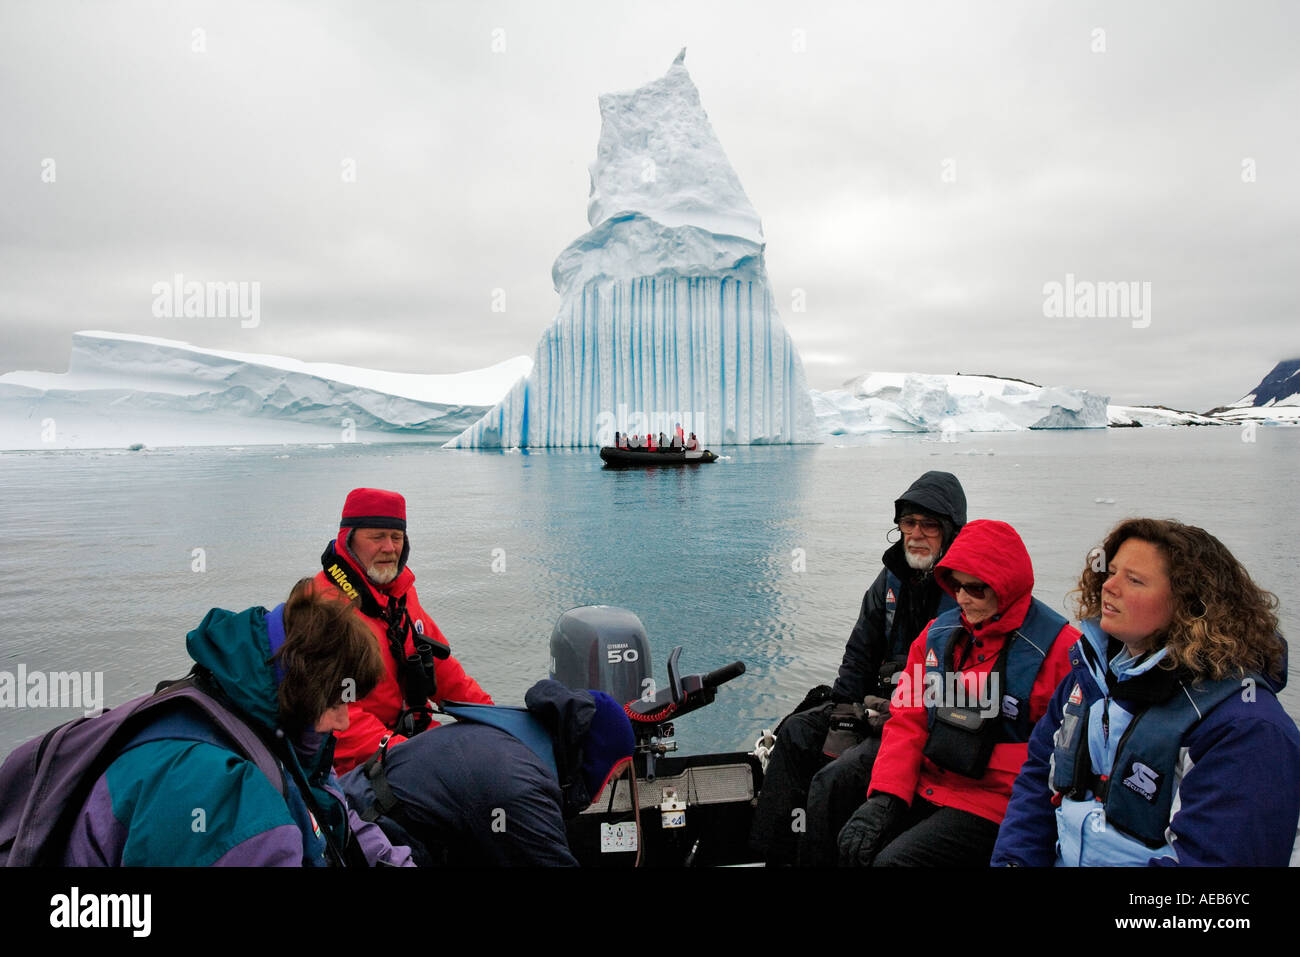 Iceberg viewed by tourists Tourists in a zodiac viewing a ragged edged iceberg Antarctica Stock Photo